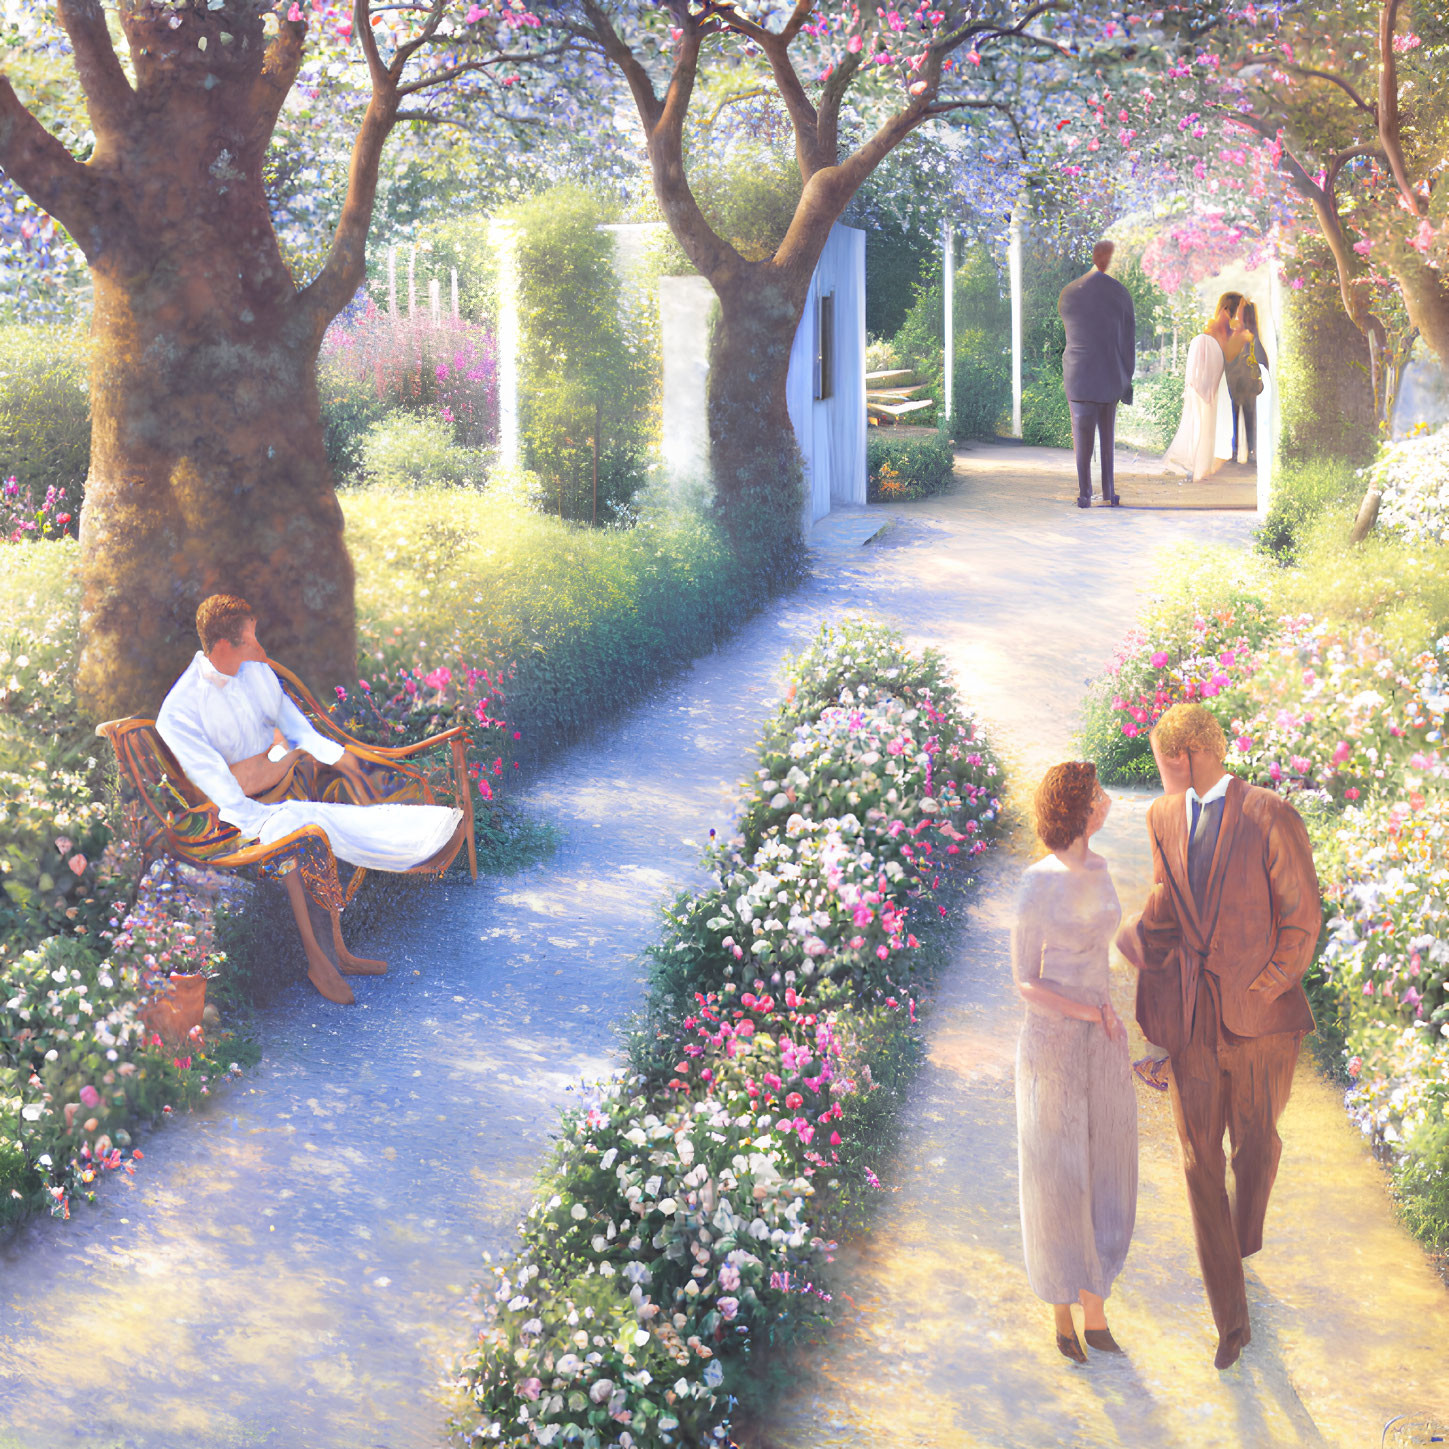 Tranquil garden path with blooming flowers, couples walking, and man on bench